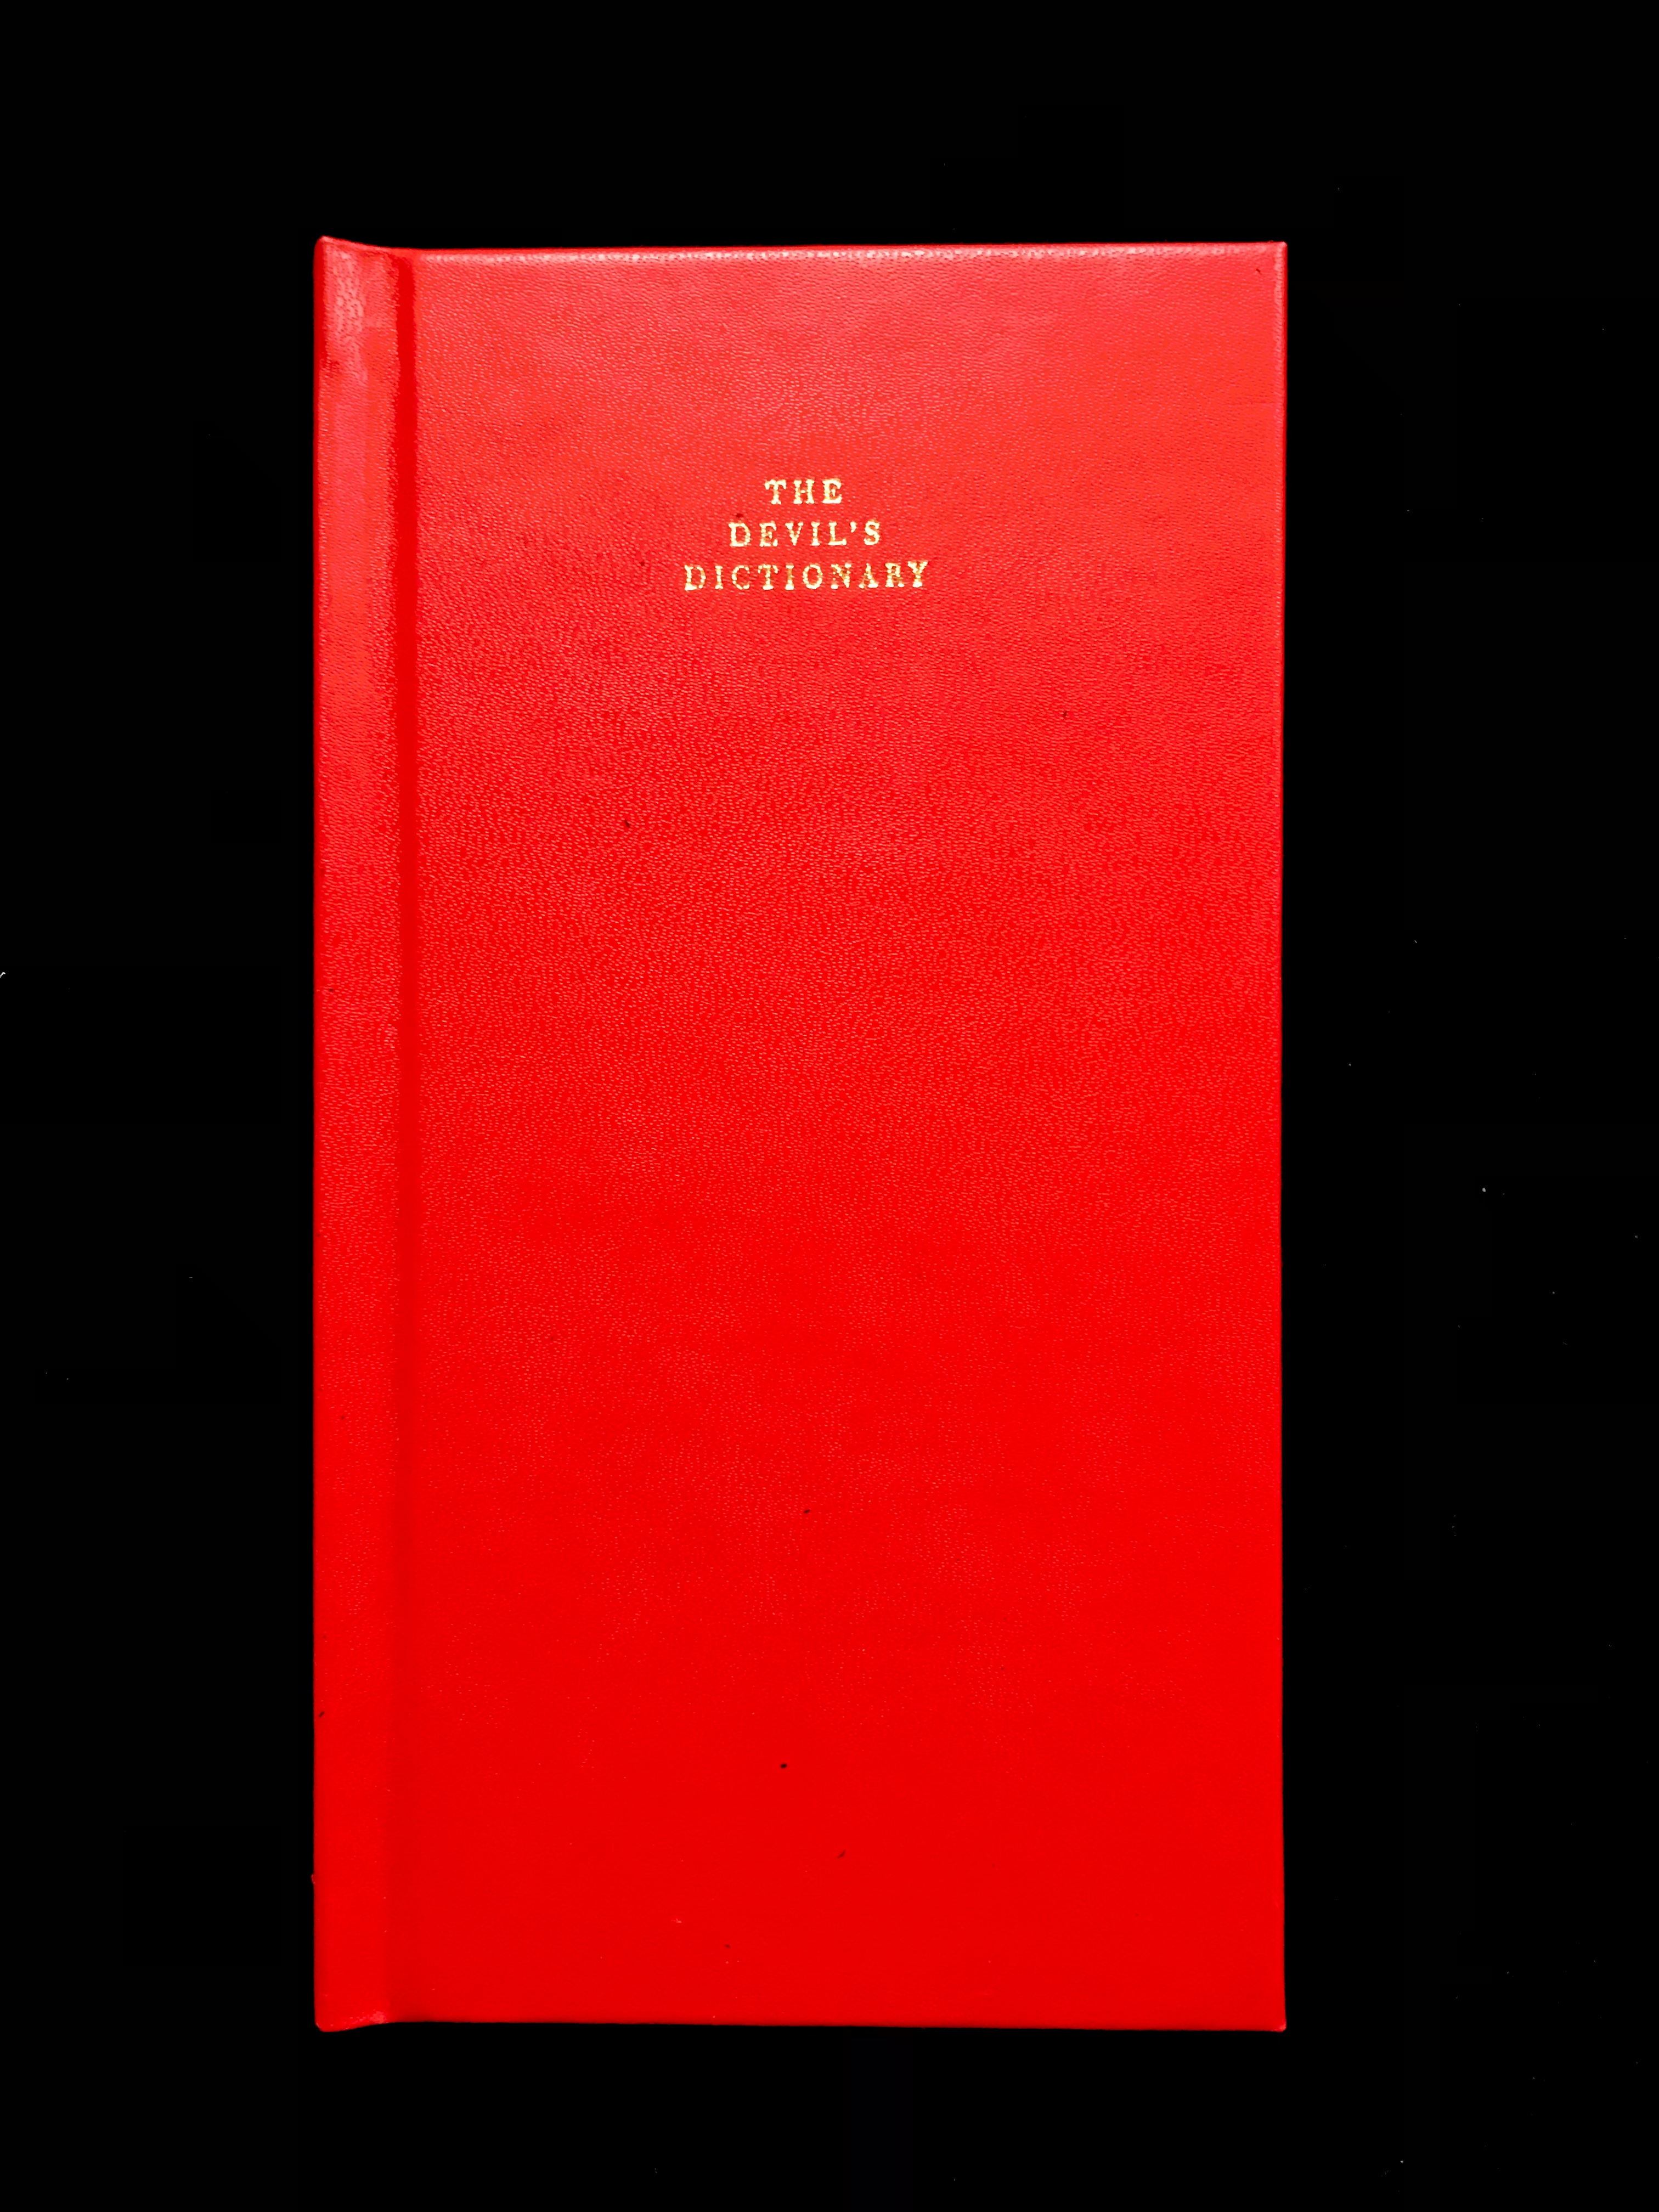 The Devils Dictionary by Ambrose Pierce